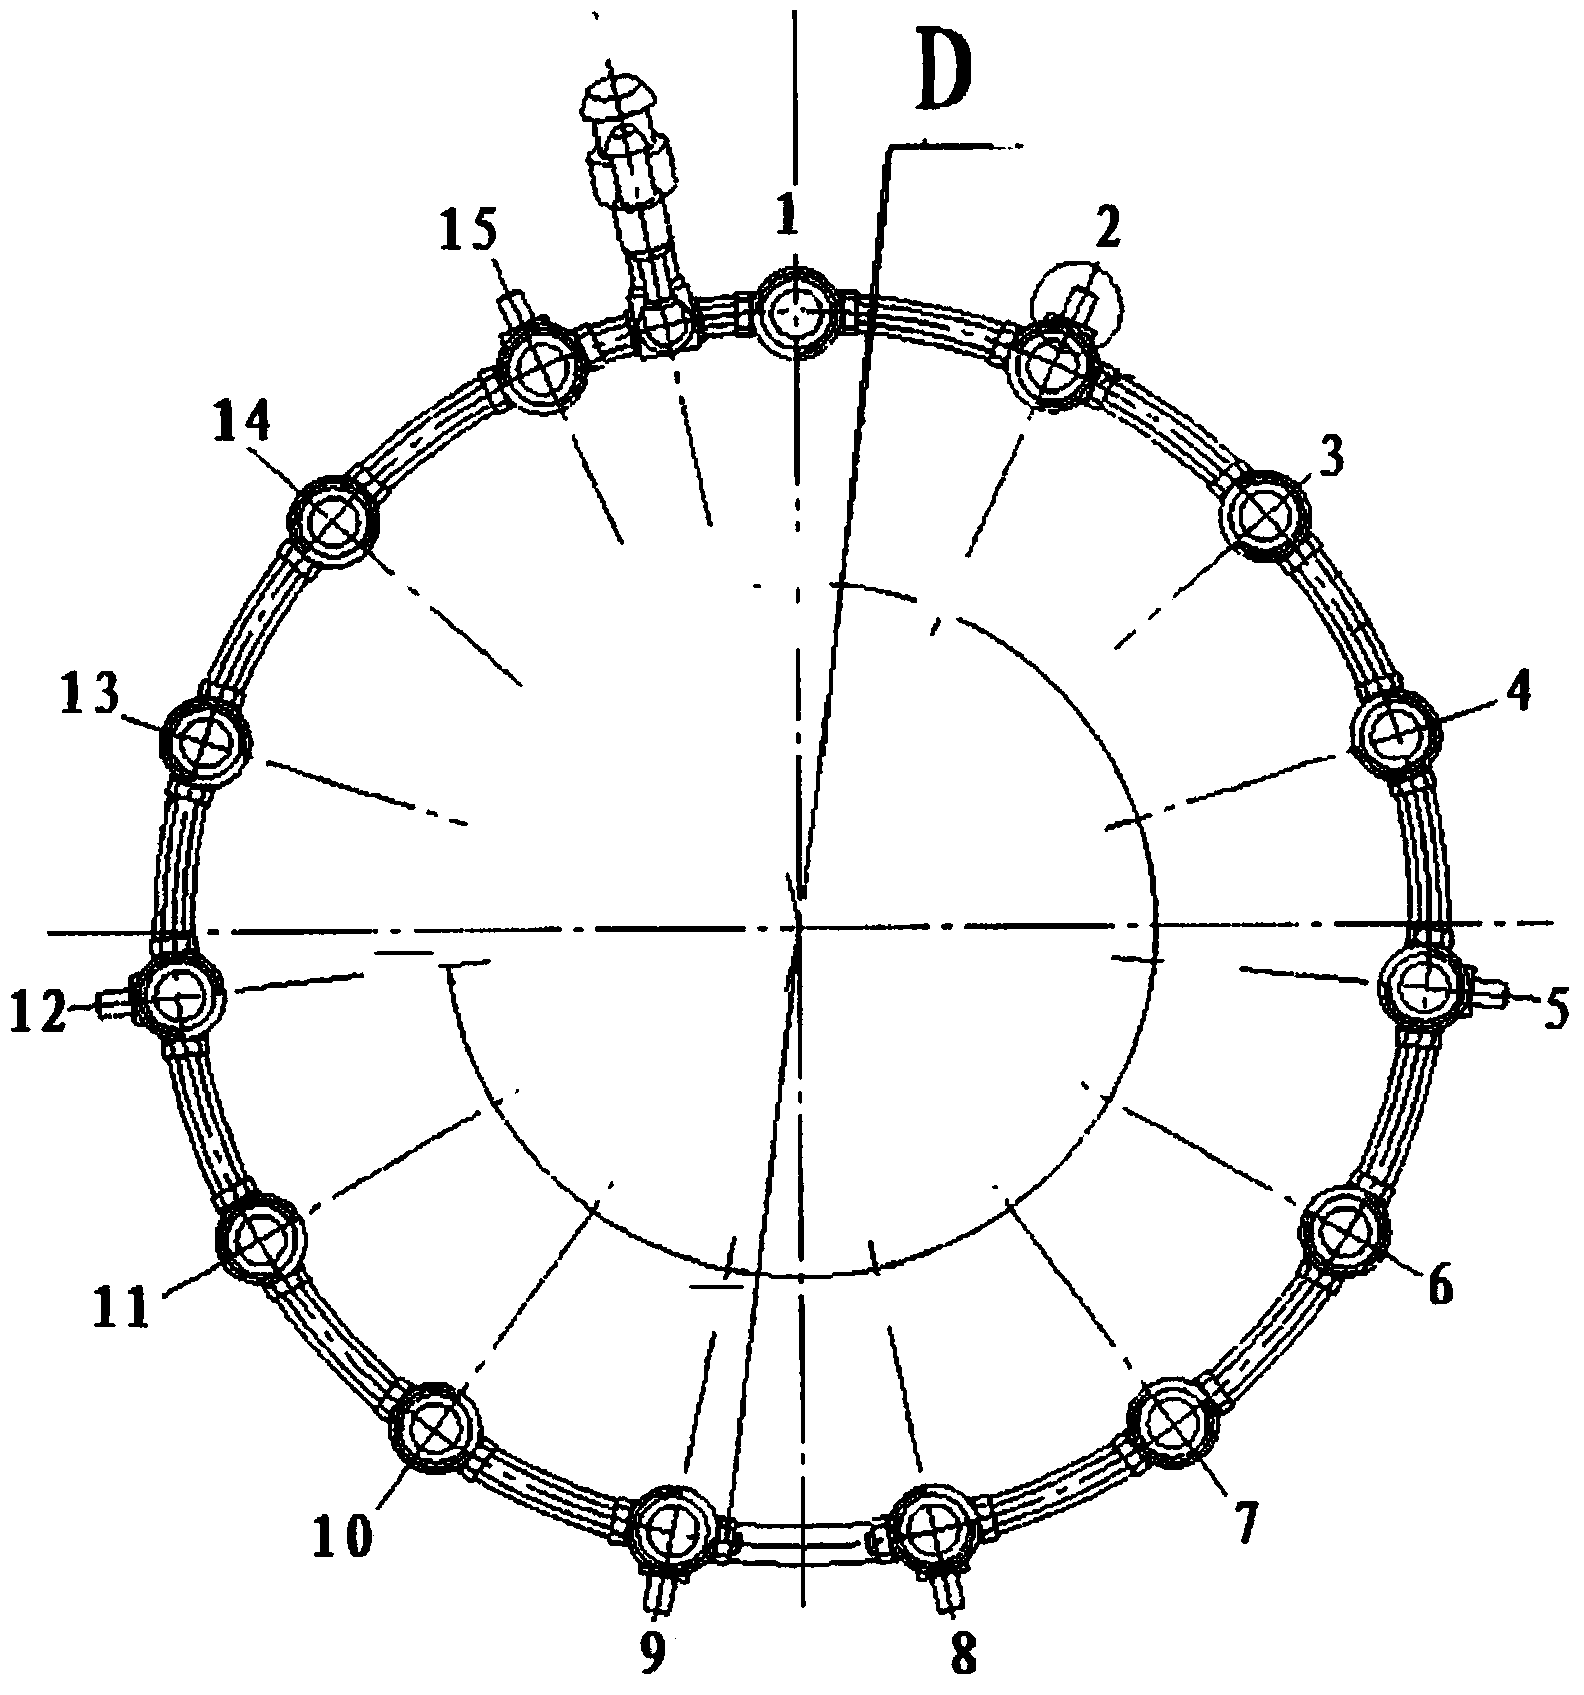 Method for machining fuel manifold with nozzles and of welding structure